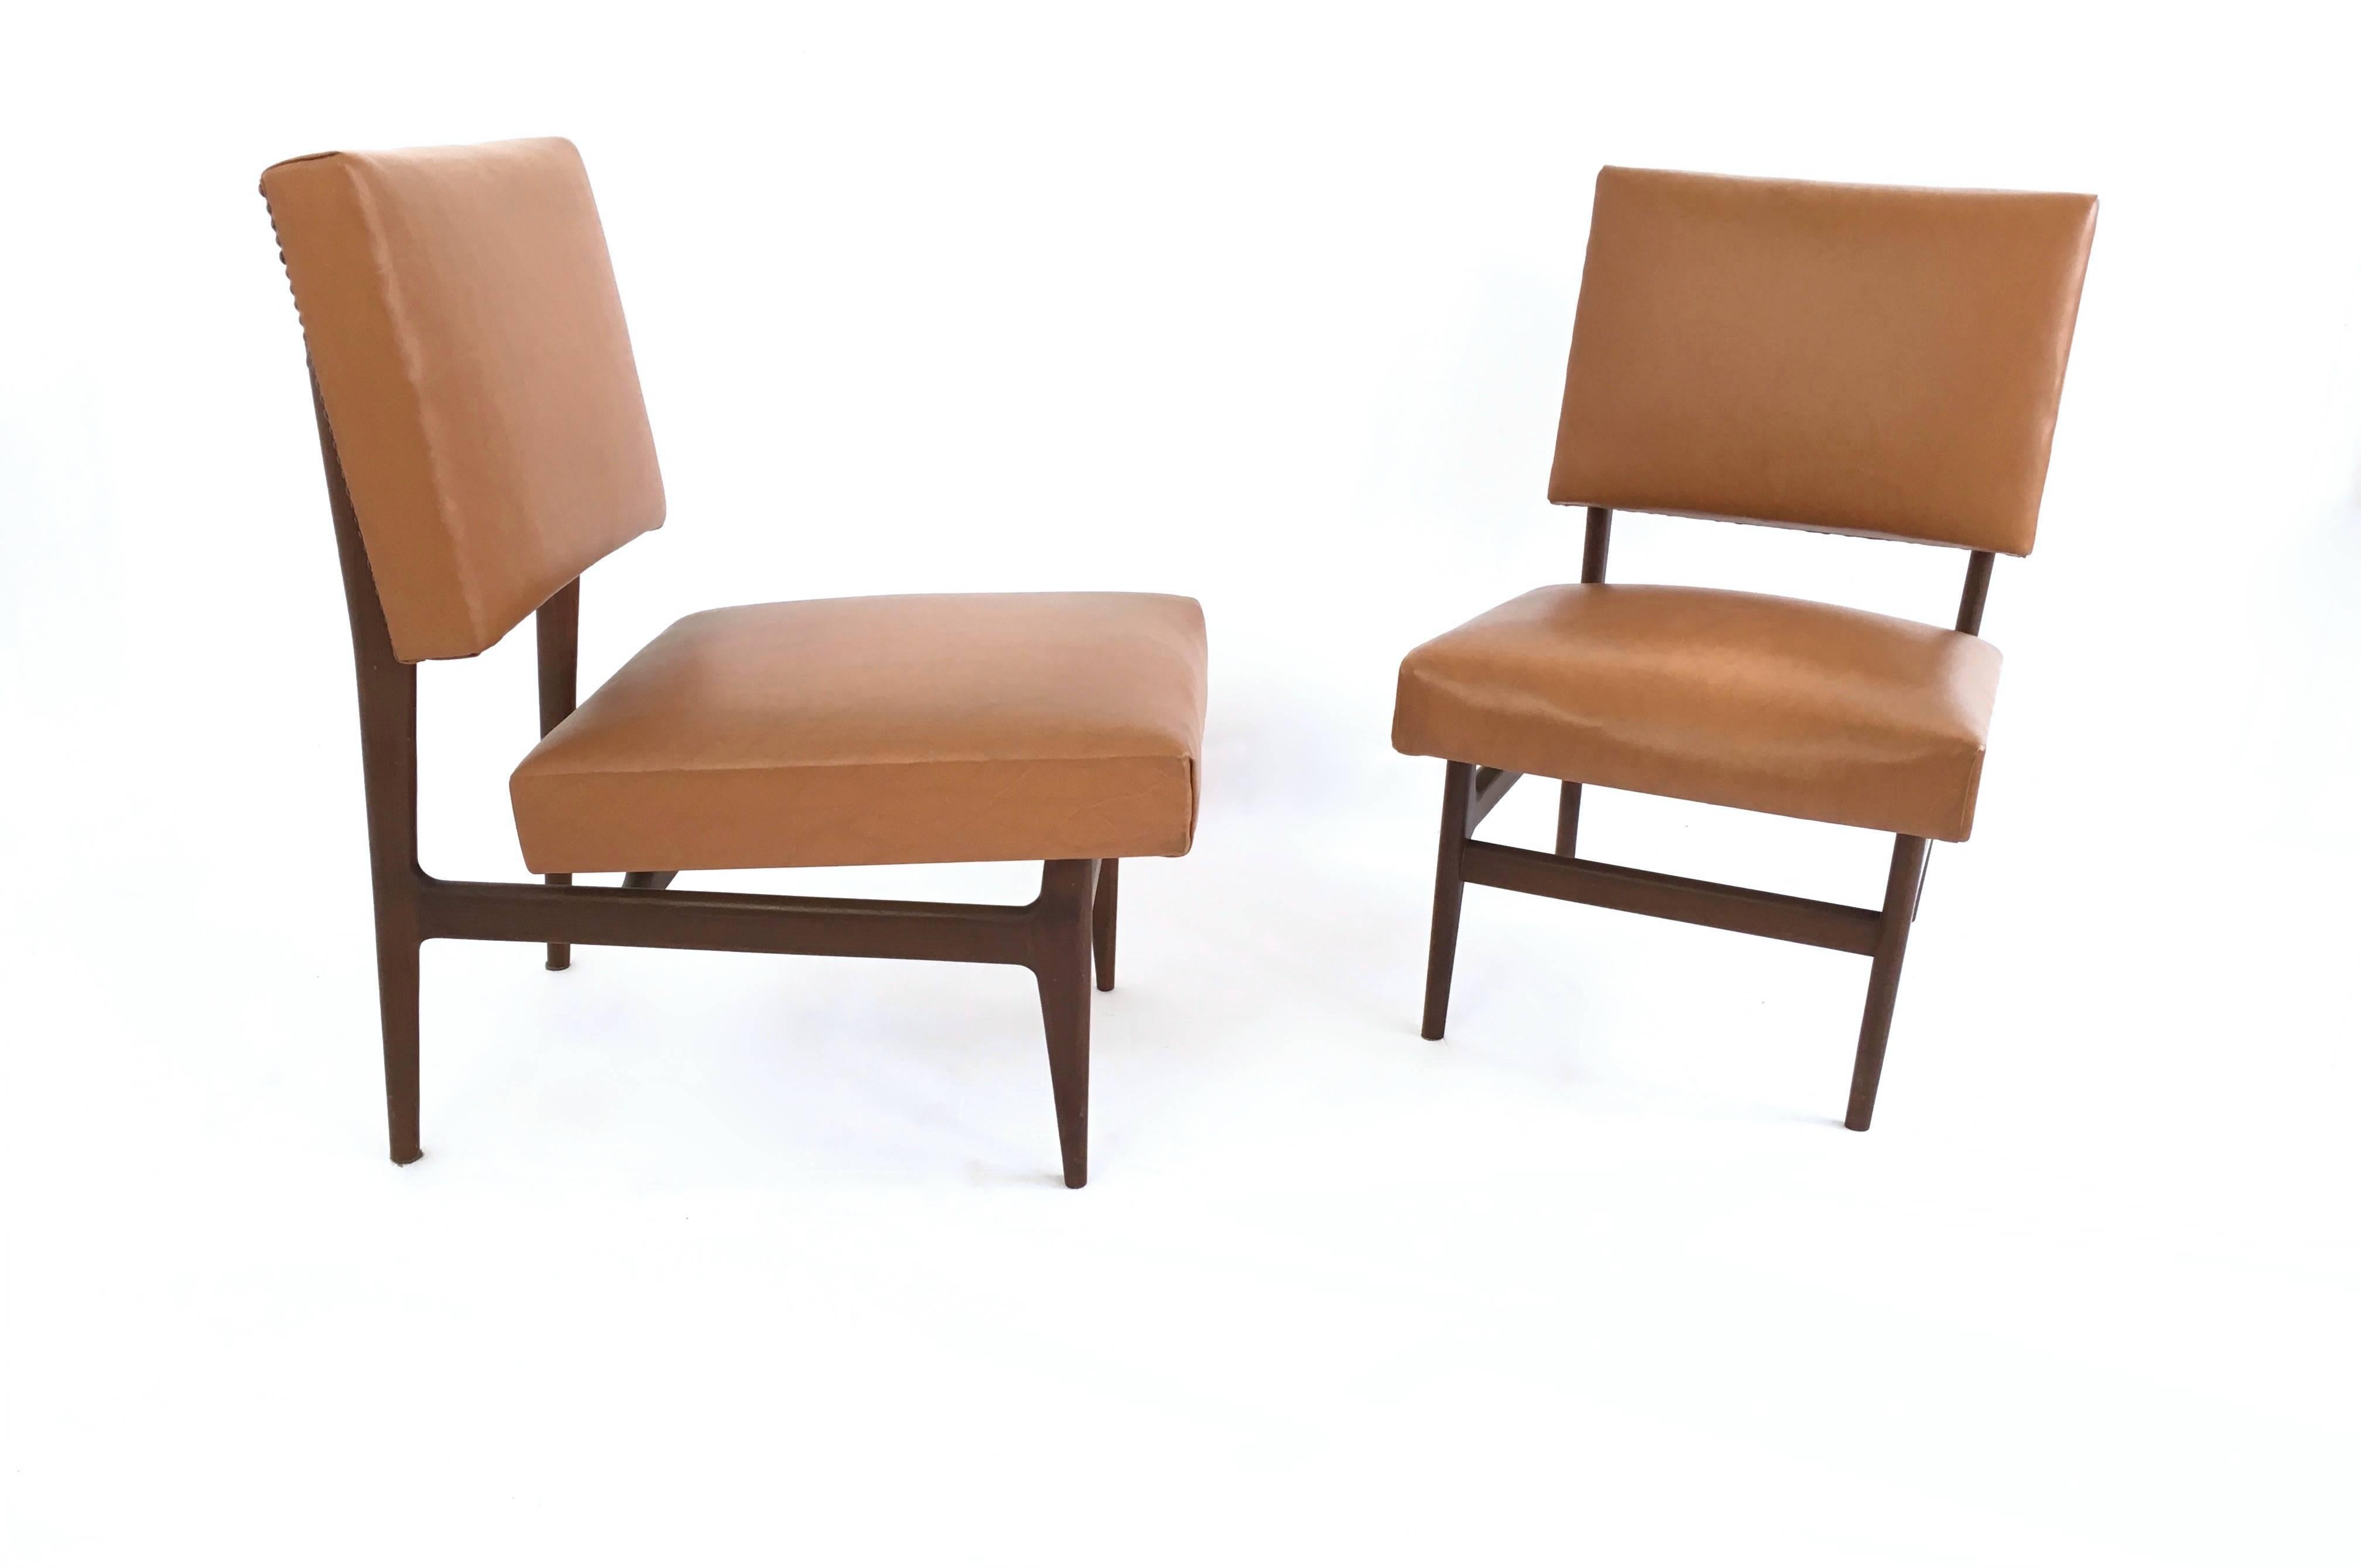 Made in Italy, 1950s.
They are upholstered and covered in skai and feature an ebonized beech structure.
These are vintage pieces, therefore they might show slight traces of use, but they can be considered as in very good original